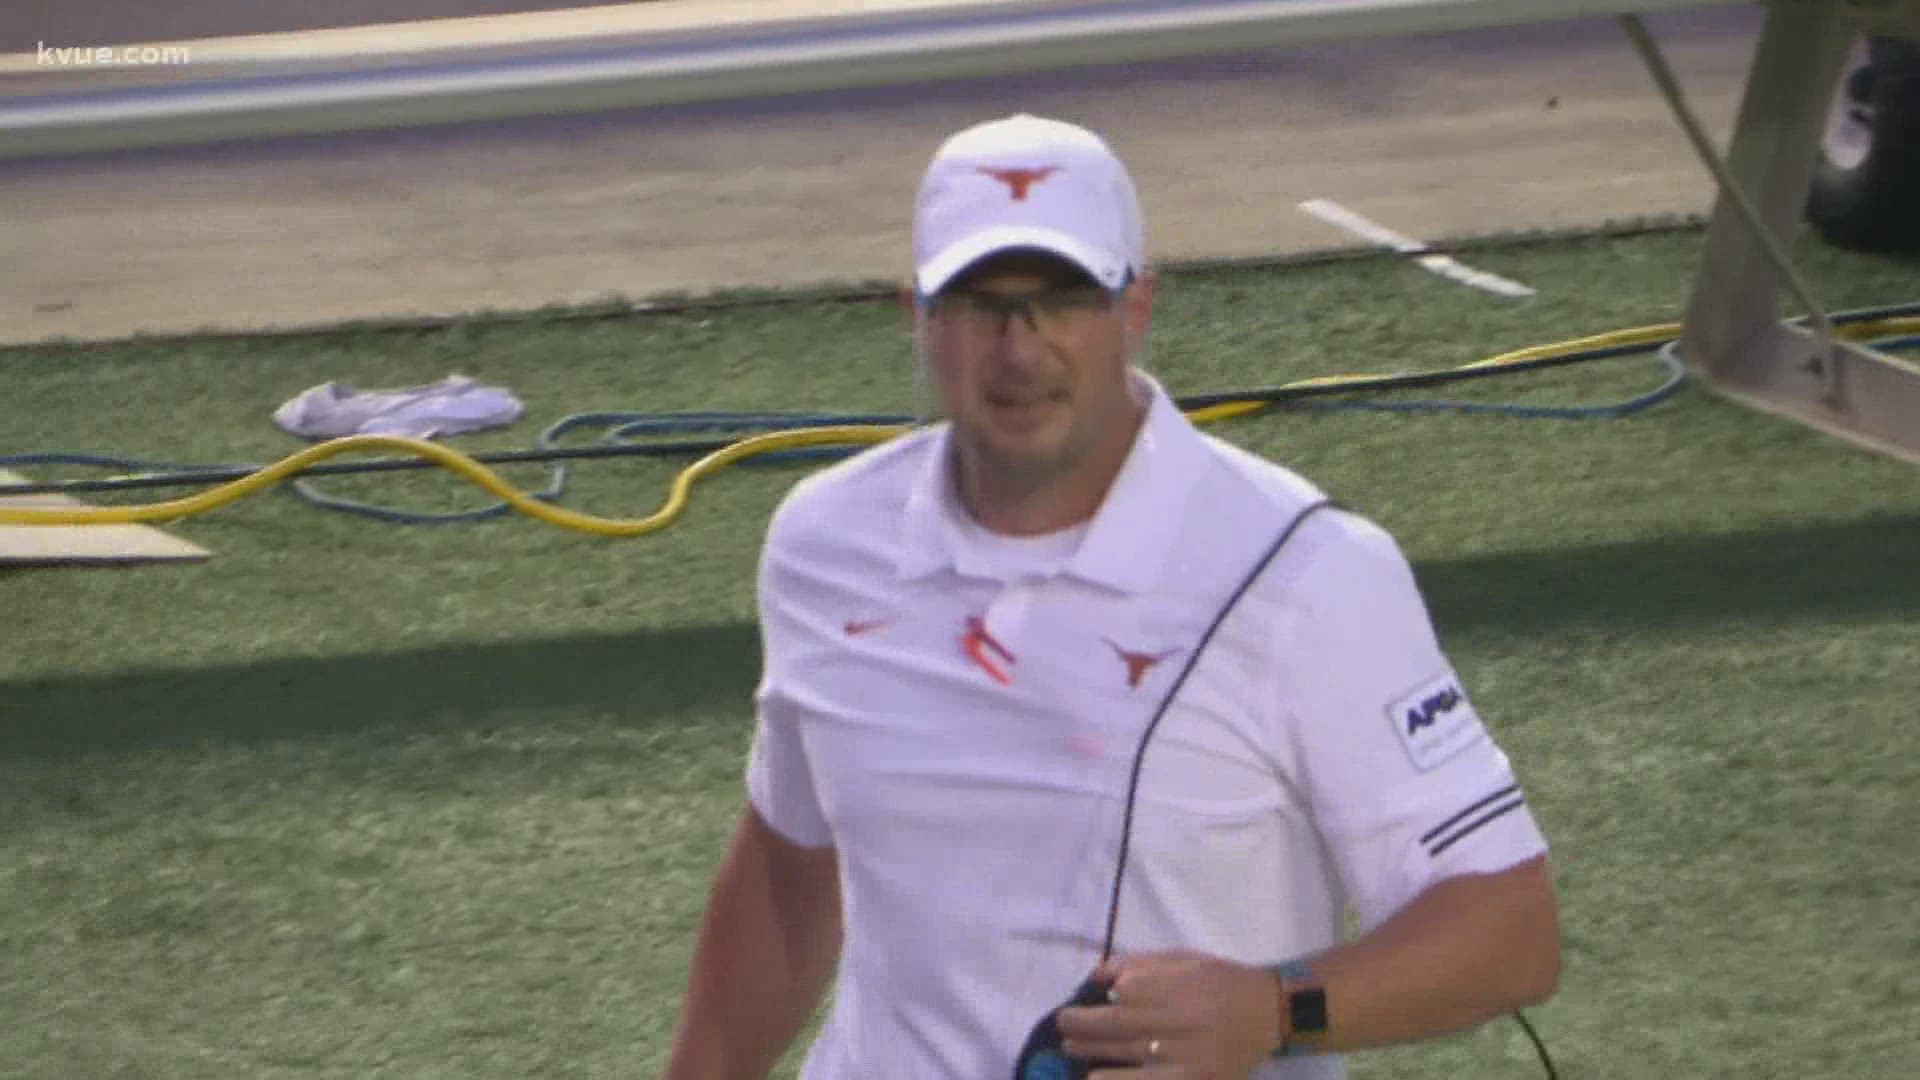 Former Texas coach Tom Herman is going pro. He has accepted a position as an offensive analyst for the Chicago Bears.